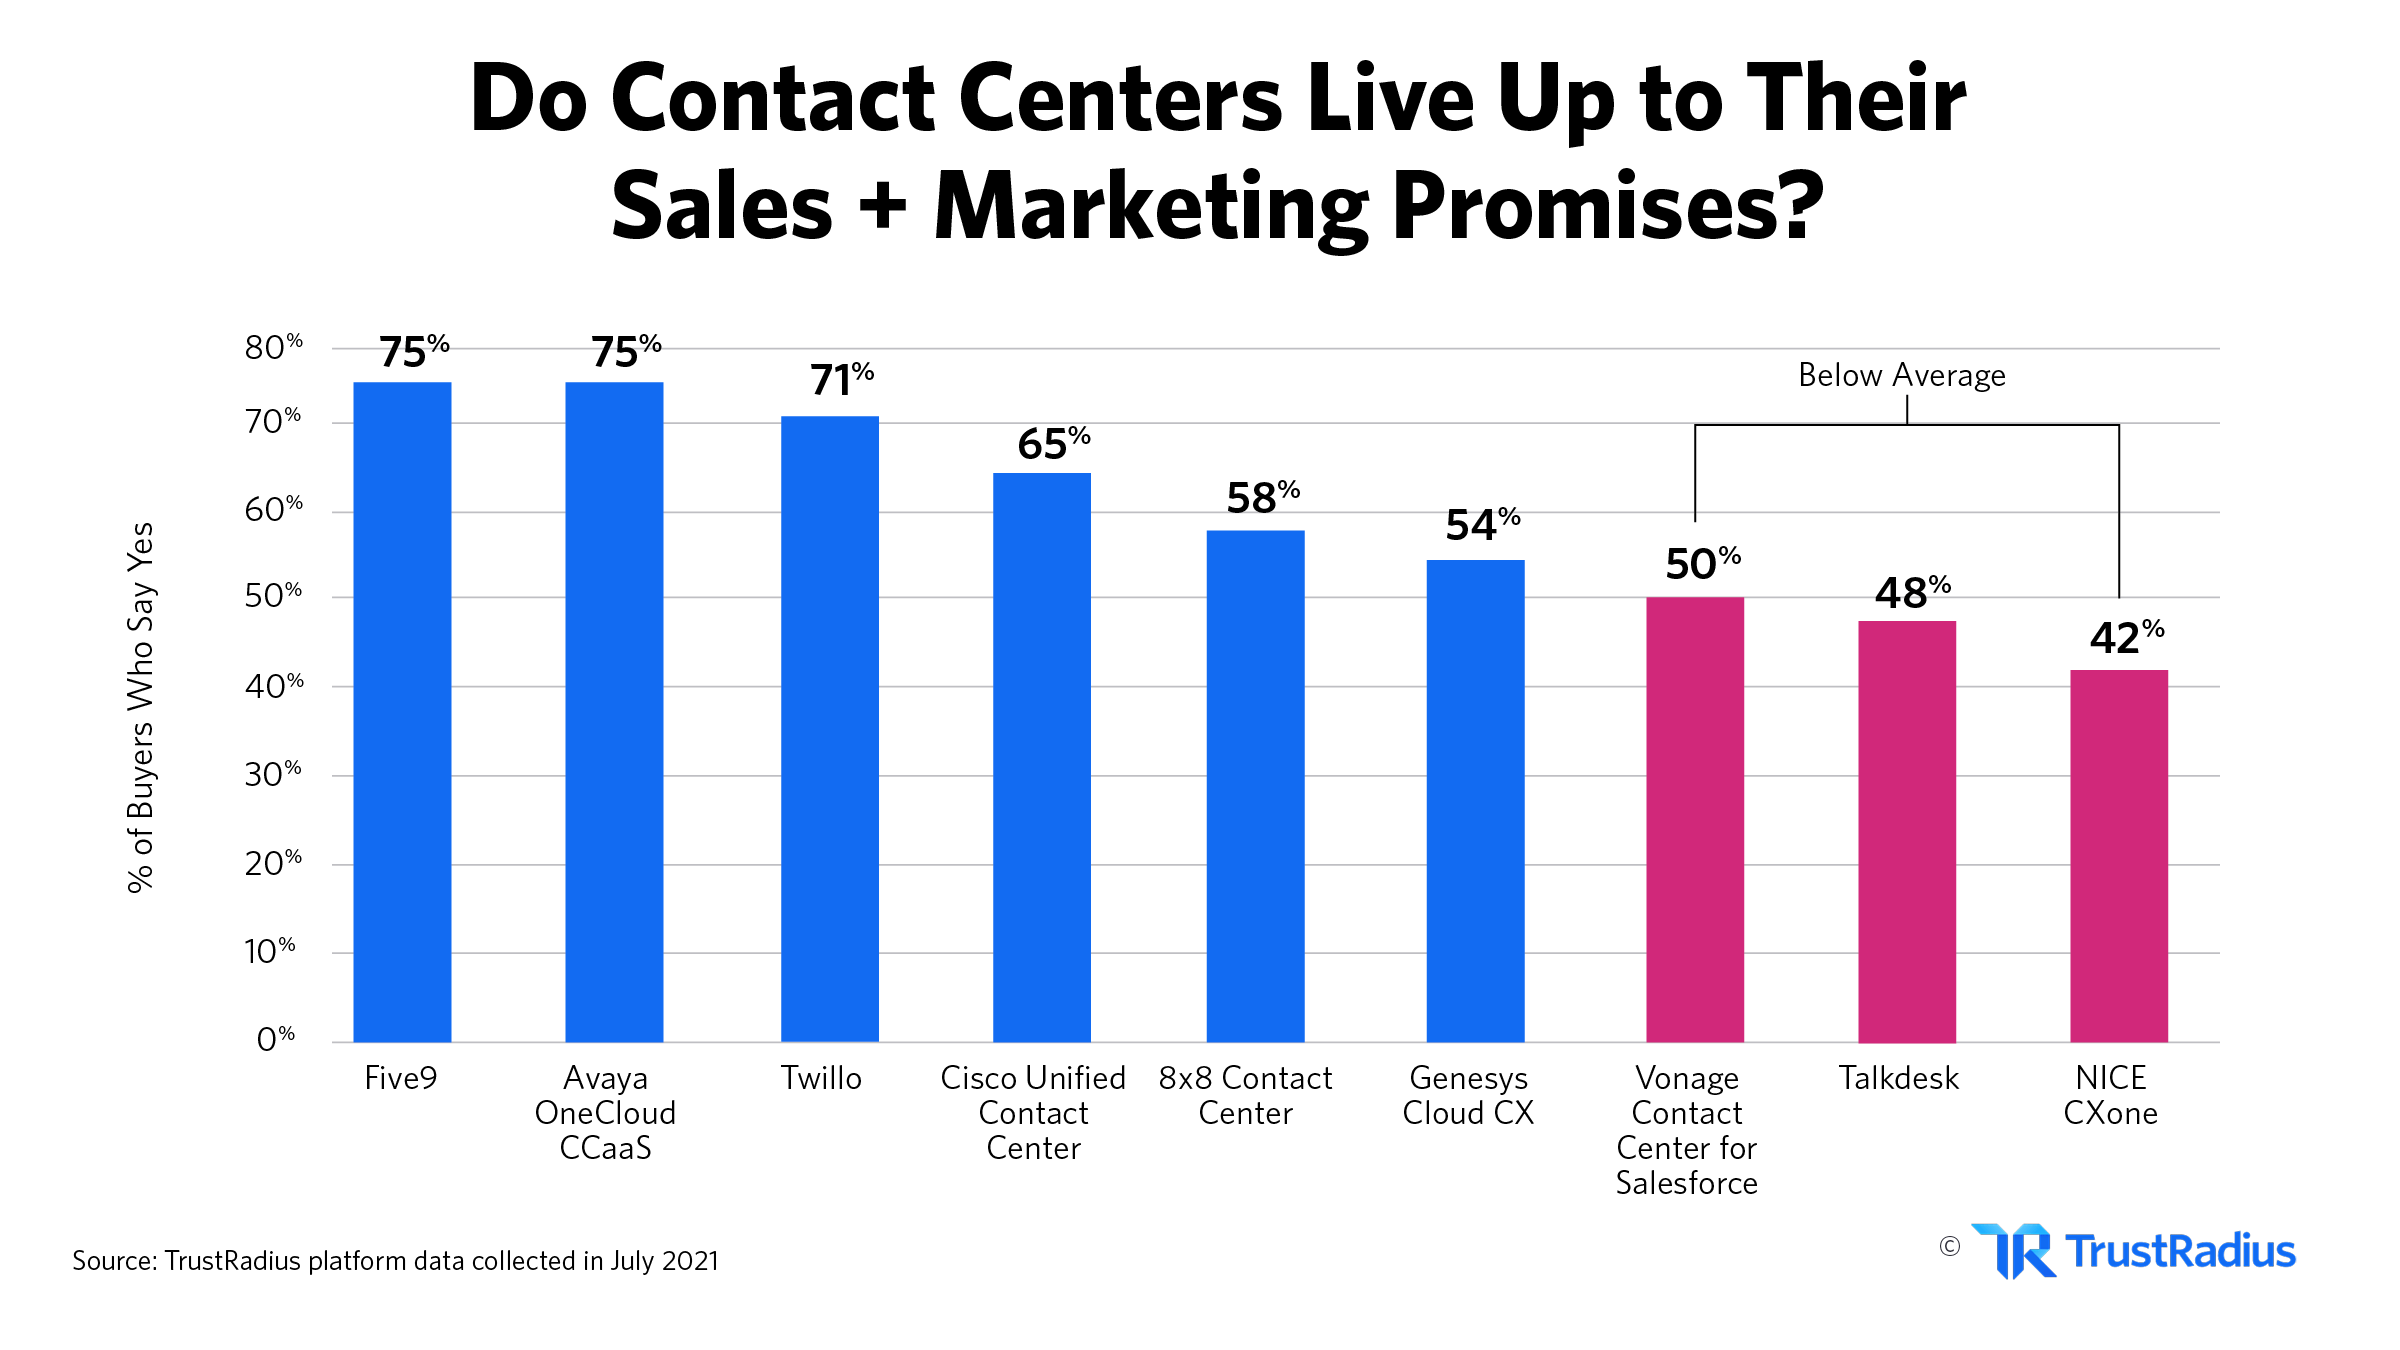 Do contact centers live up to their sales and marketing promises?